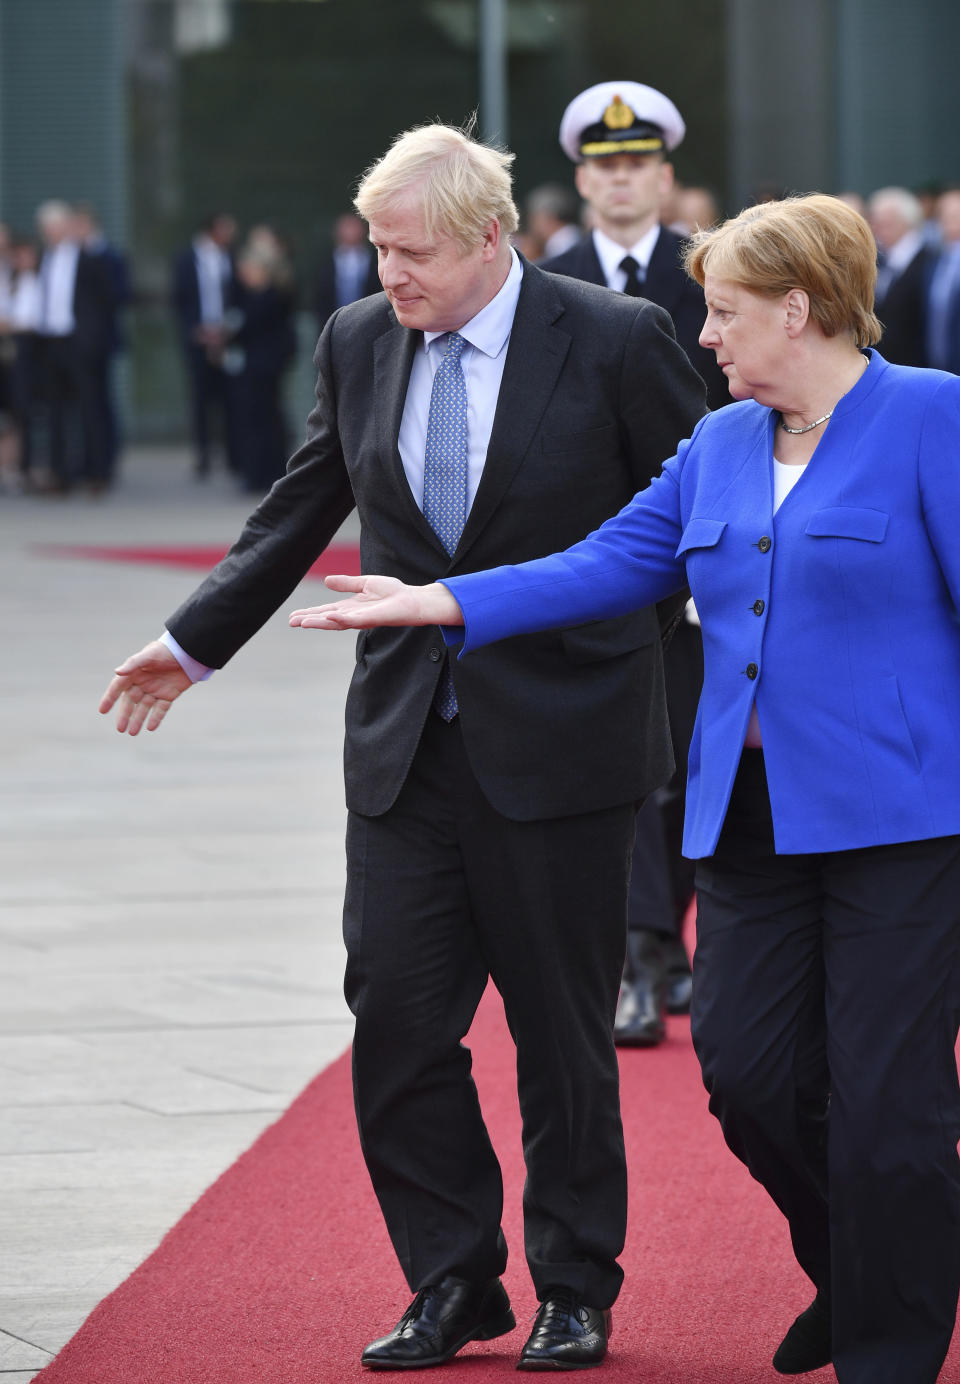 Germany's Chancellor Angela Merkel meets with British Prime Minister Boris Johnson, in Berlin, Wednesday, Aug. 21, 2019. German Chancellor Angela Merkel says she plans to discuss with UK Prime Minister Boris Johnson how Britain's exit from the European Union can be "as frictionless as possible." (Bernd Von Jutrczenka/dpa via AP)